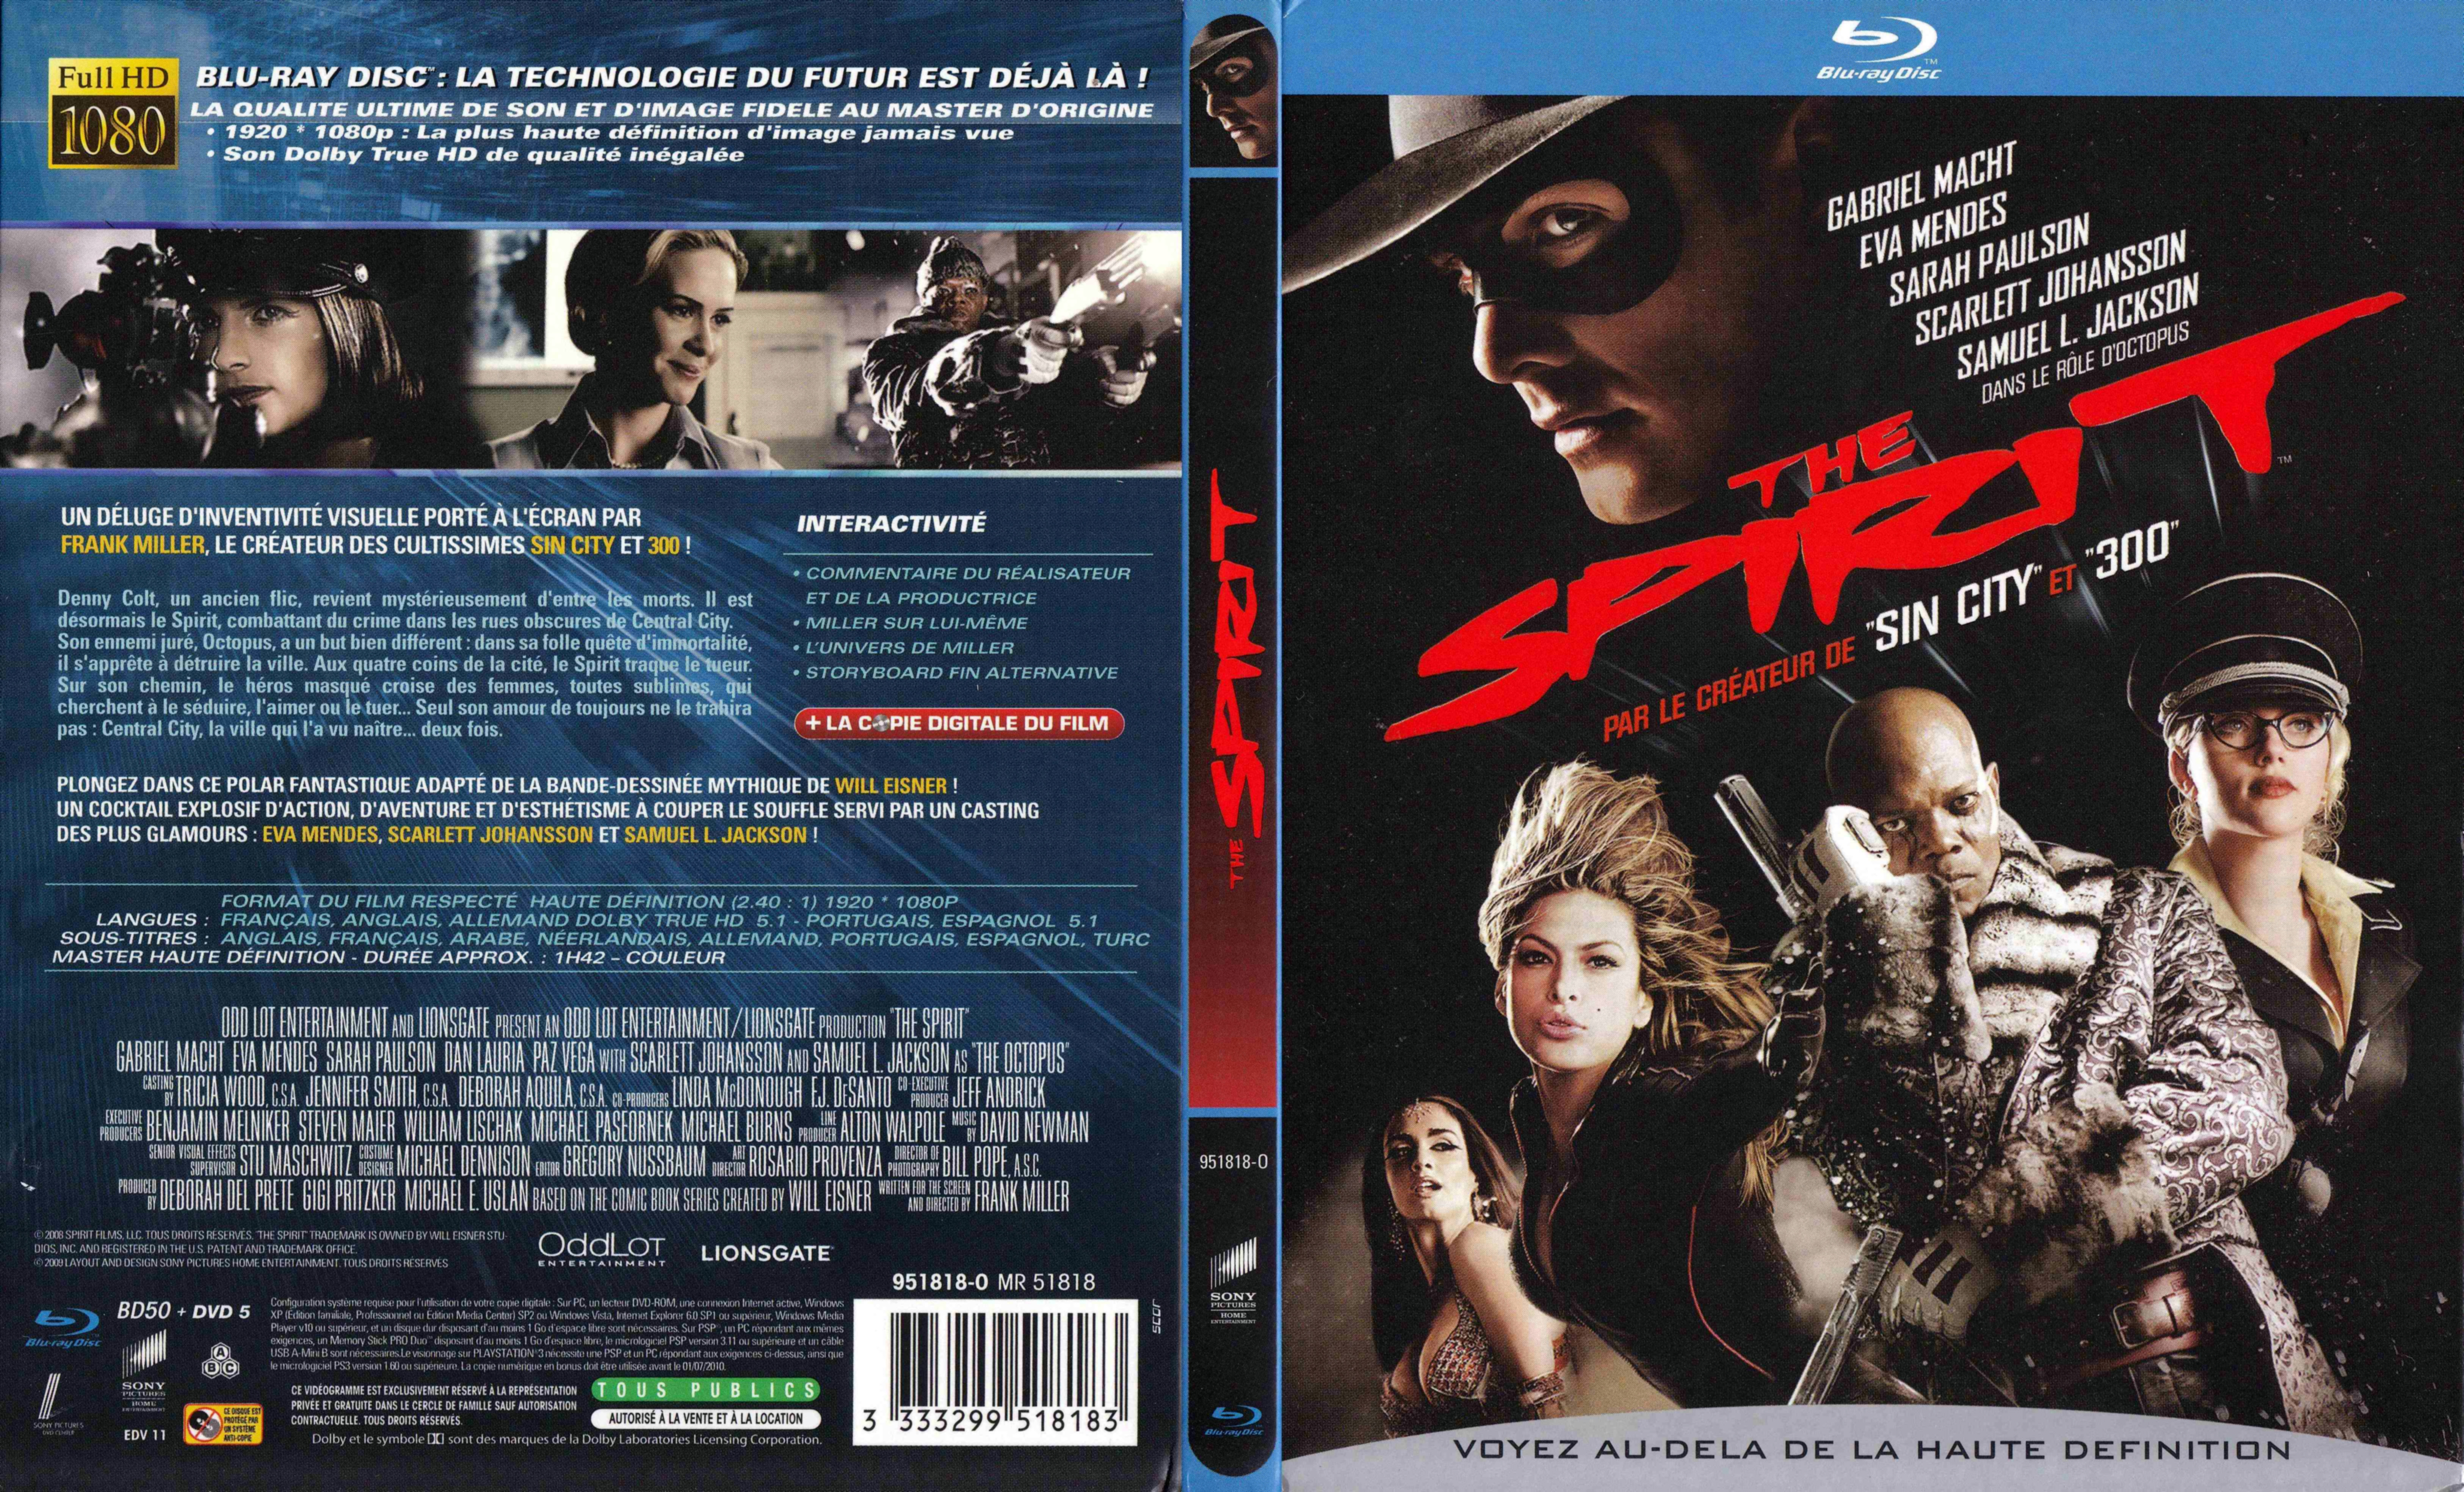 Jaquette DVD The spirit (BLU-RAY)